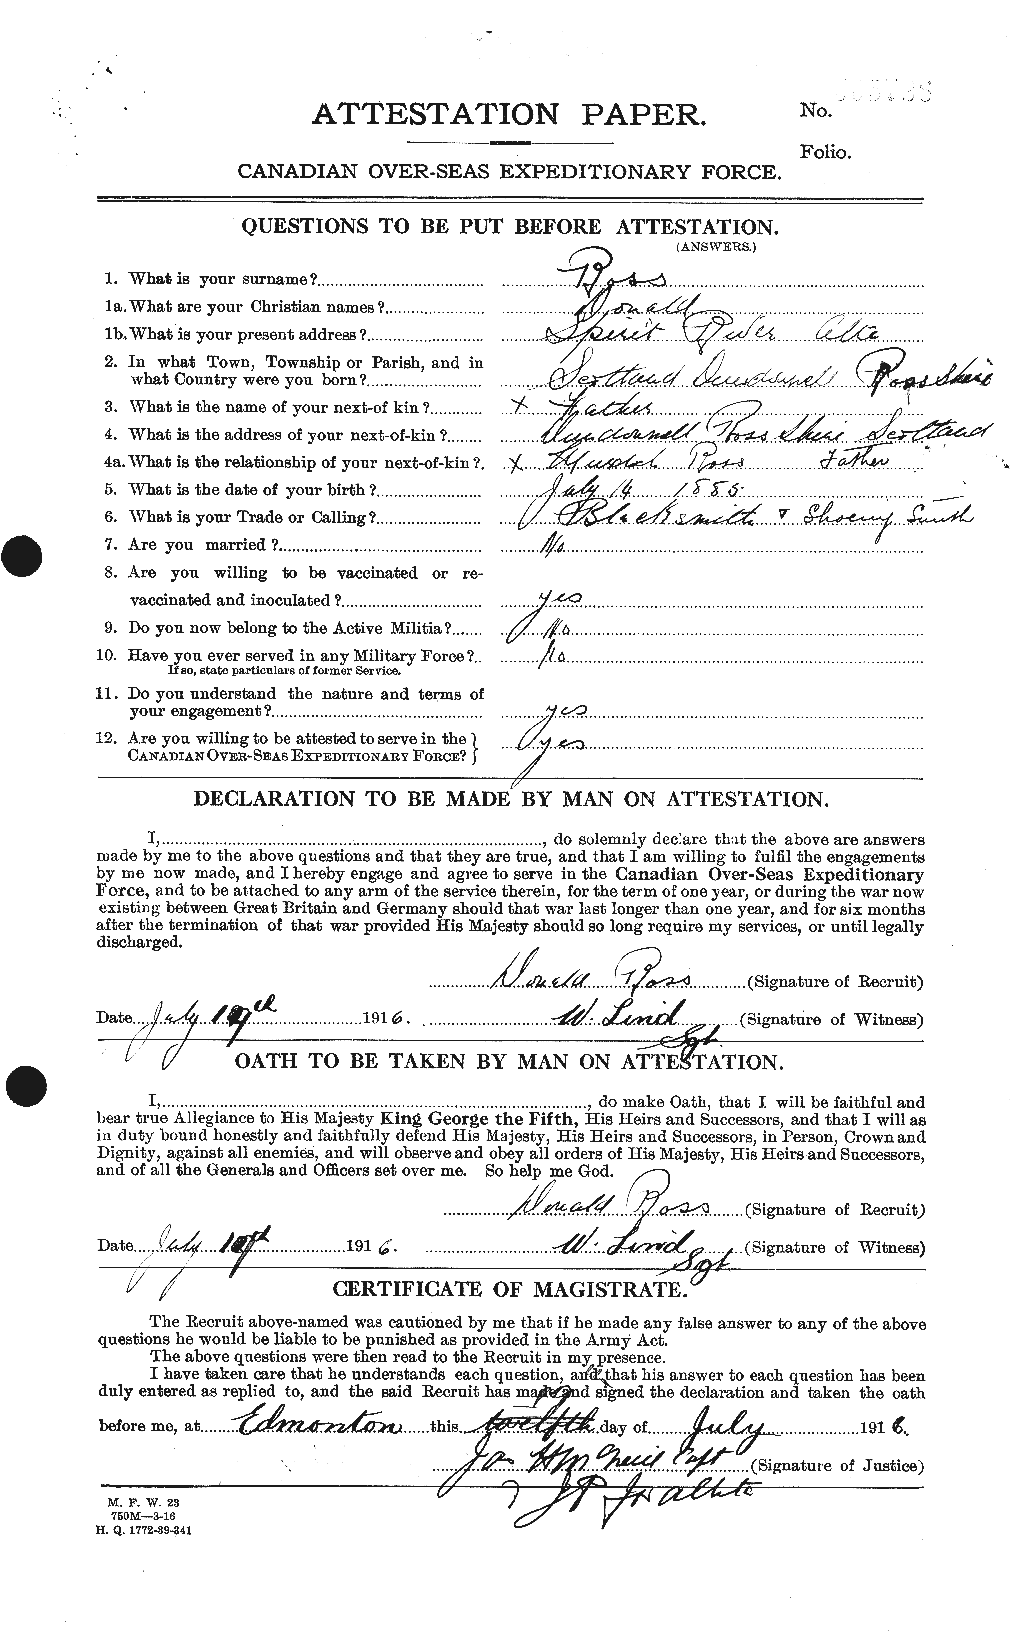 Personnel Records of the First World War - CEF 612859a